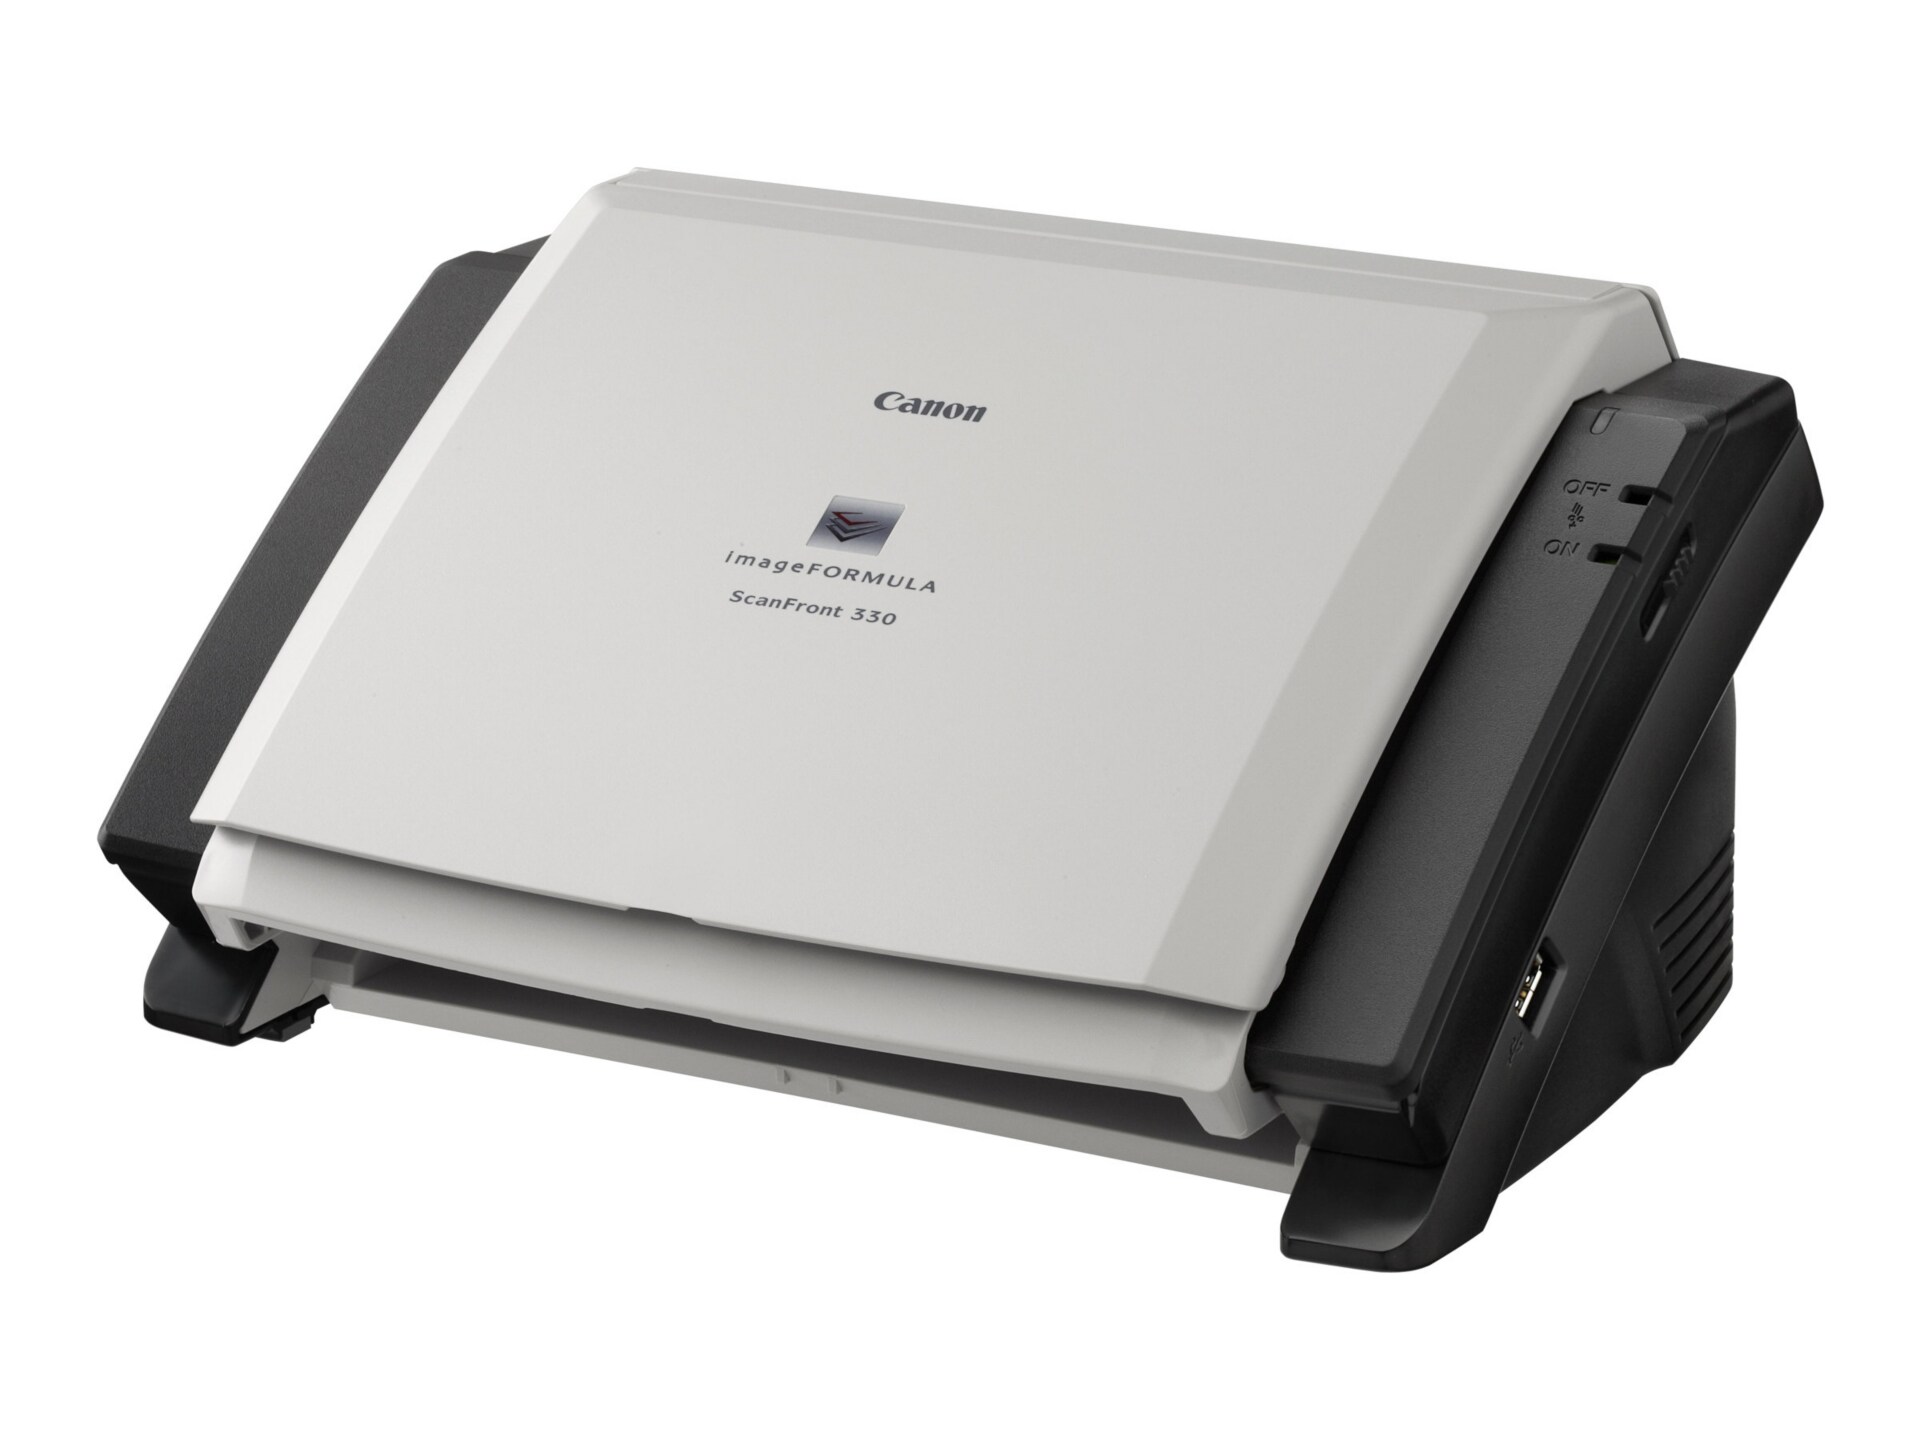 Canon imageFORMULA ScanFront 330 Wired/USB Document Scanner